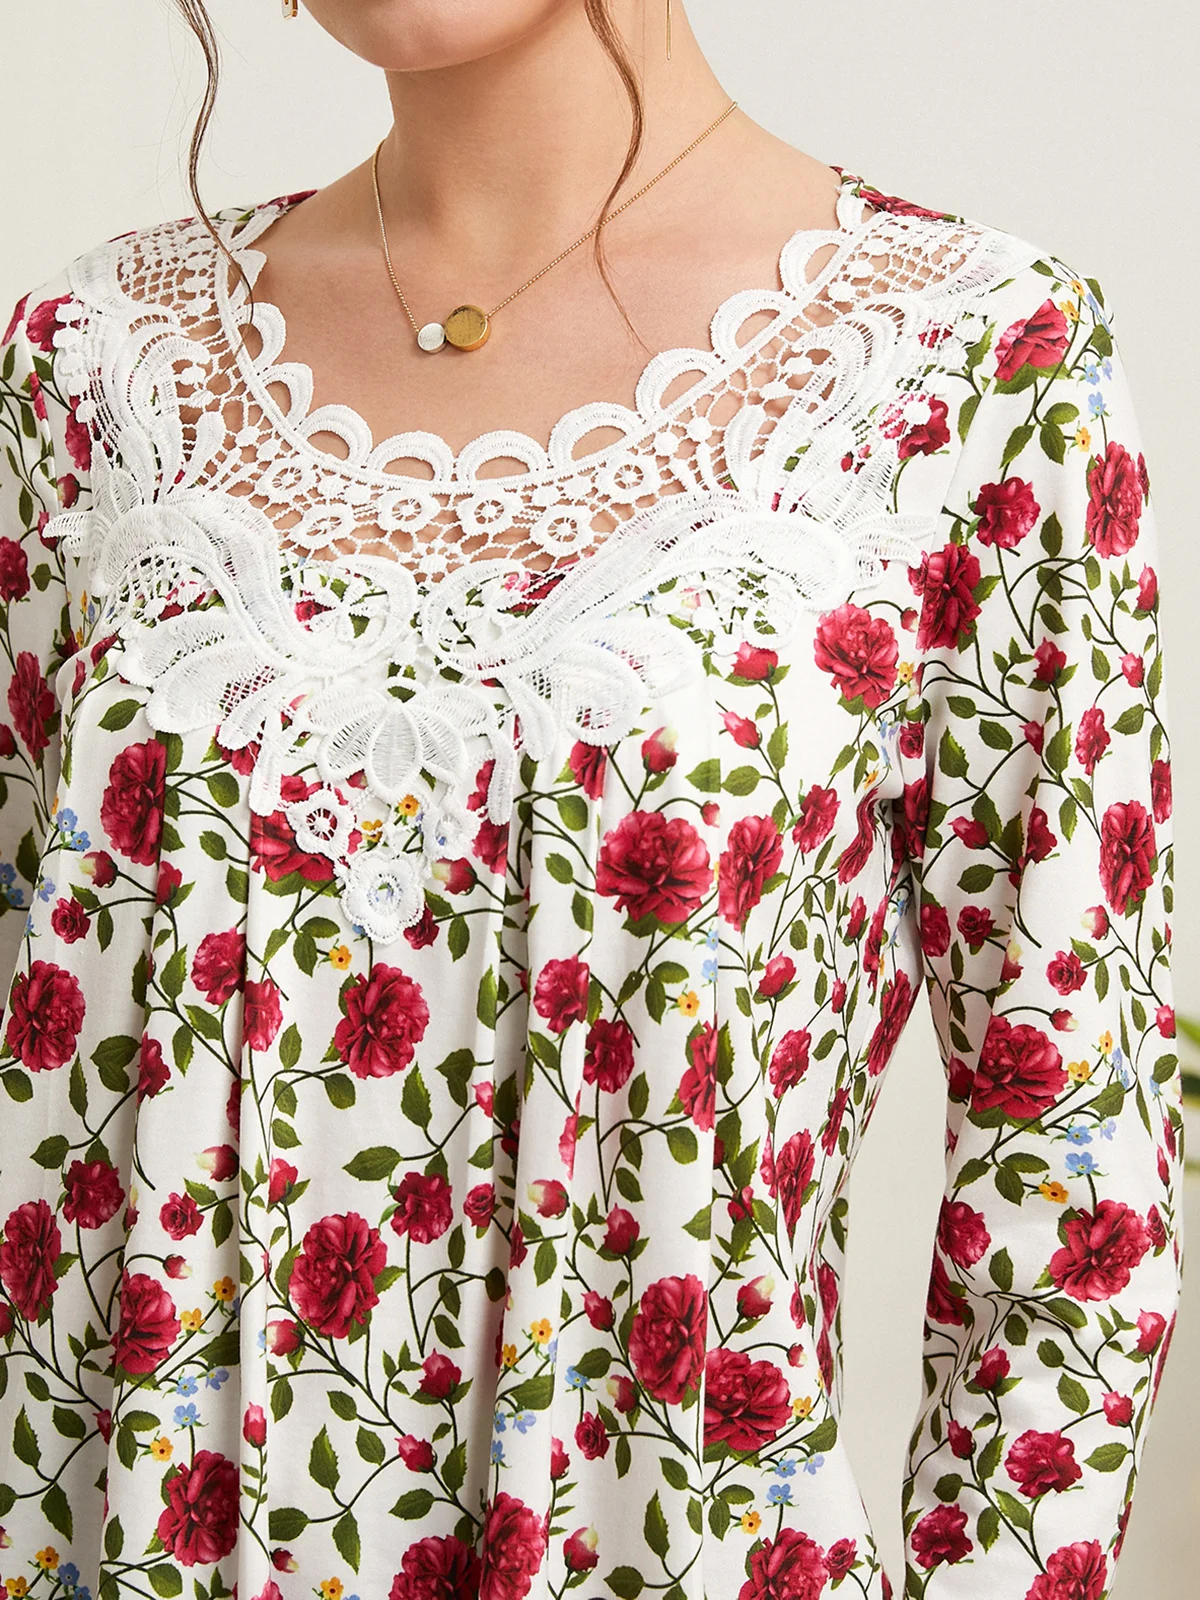 Floral Lace Crew Neck Spring Casual Blouse